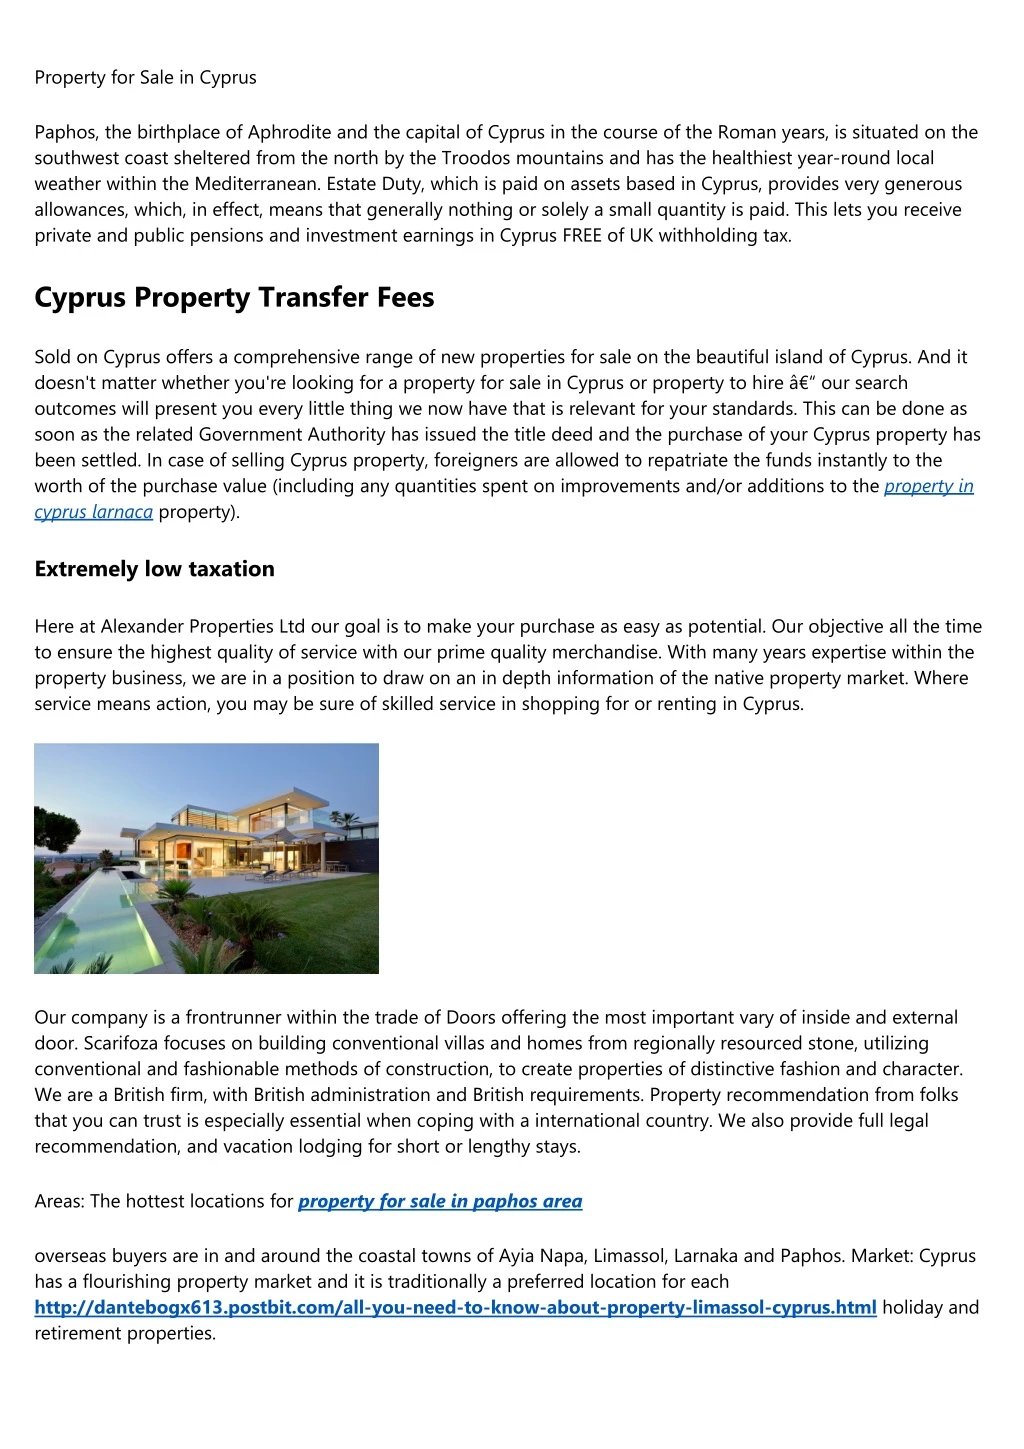 property for sale in cyprus